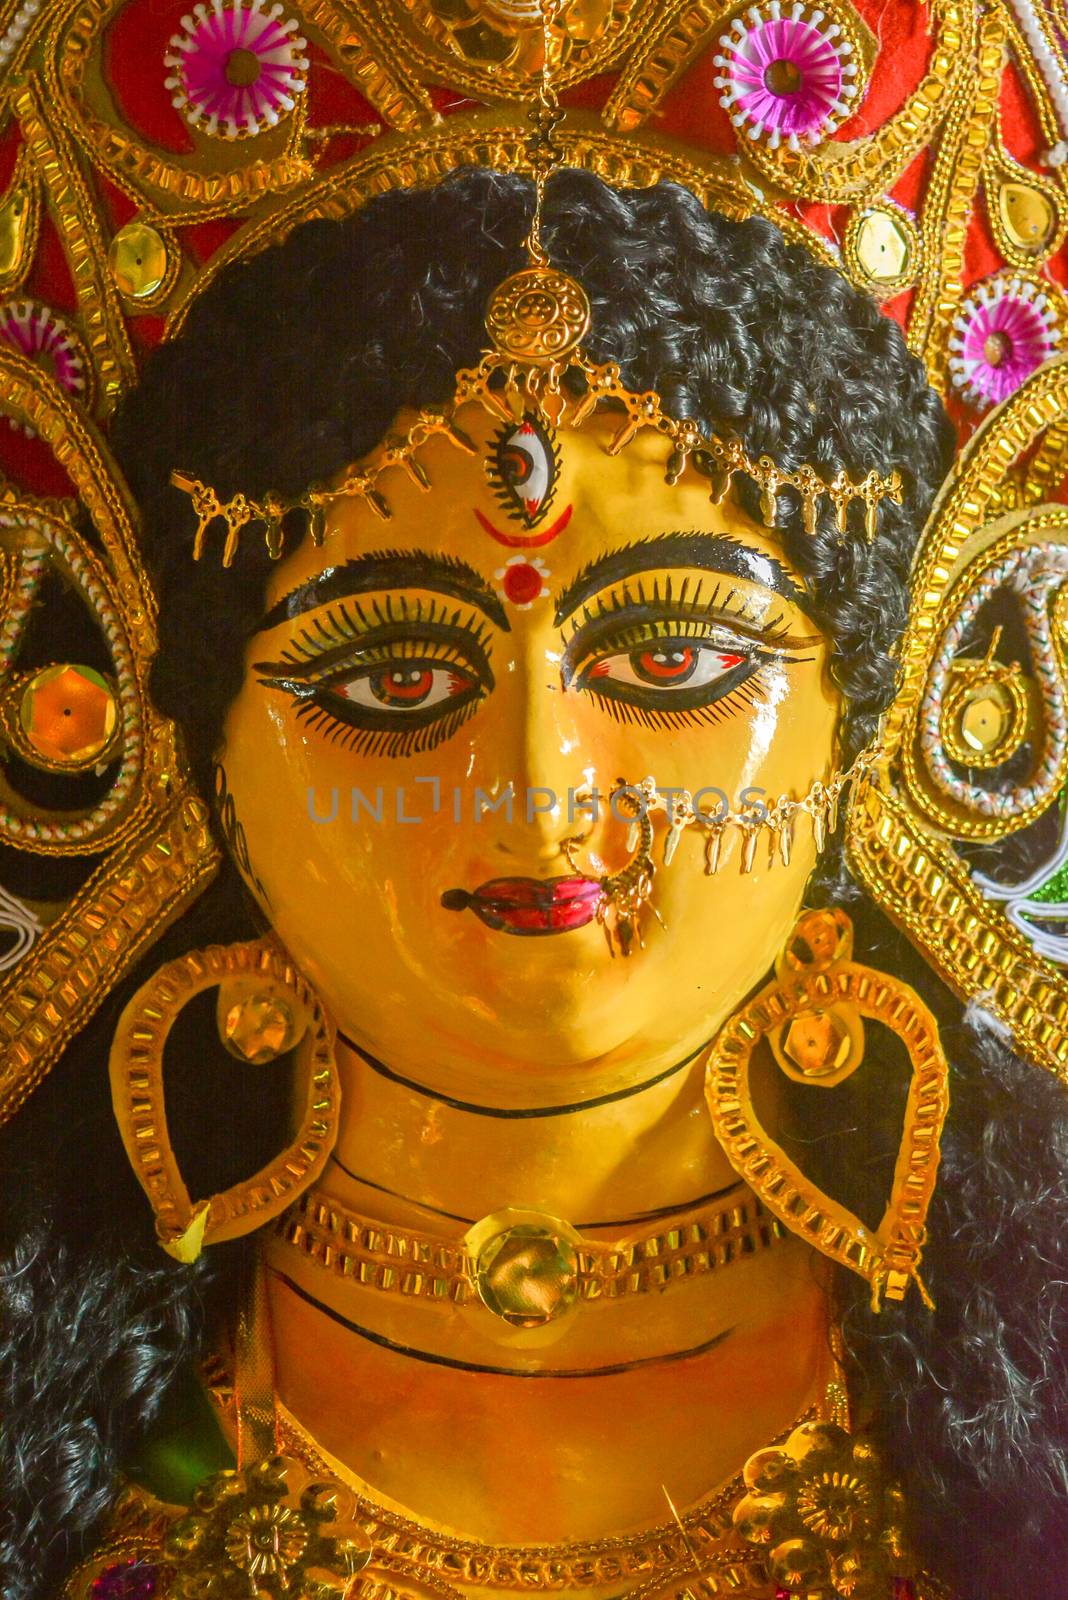 A close up face of Goddess Maa Durga Idol. A symbol of strength and power as per Hinduism. This portrait was taken during Durga Puja celebrations at a potter's studio in Kumartuli in Kolkata.